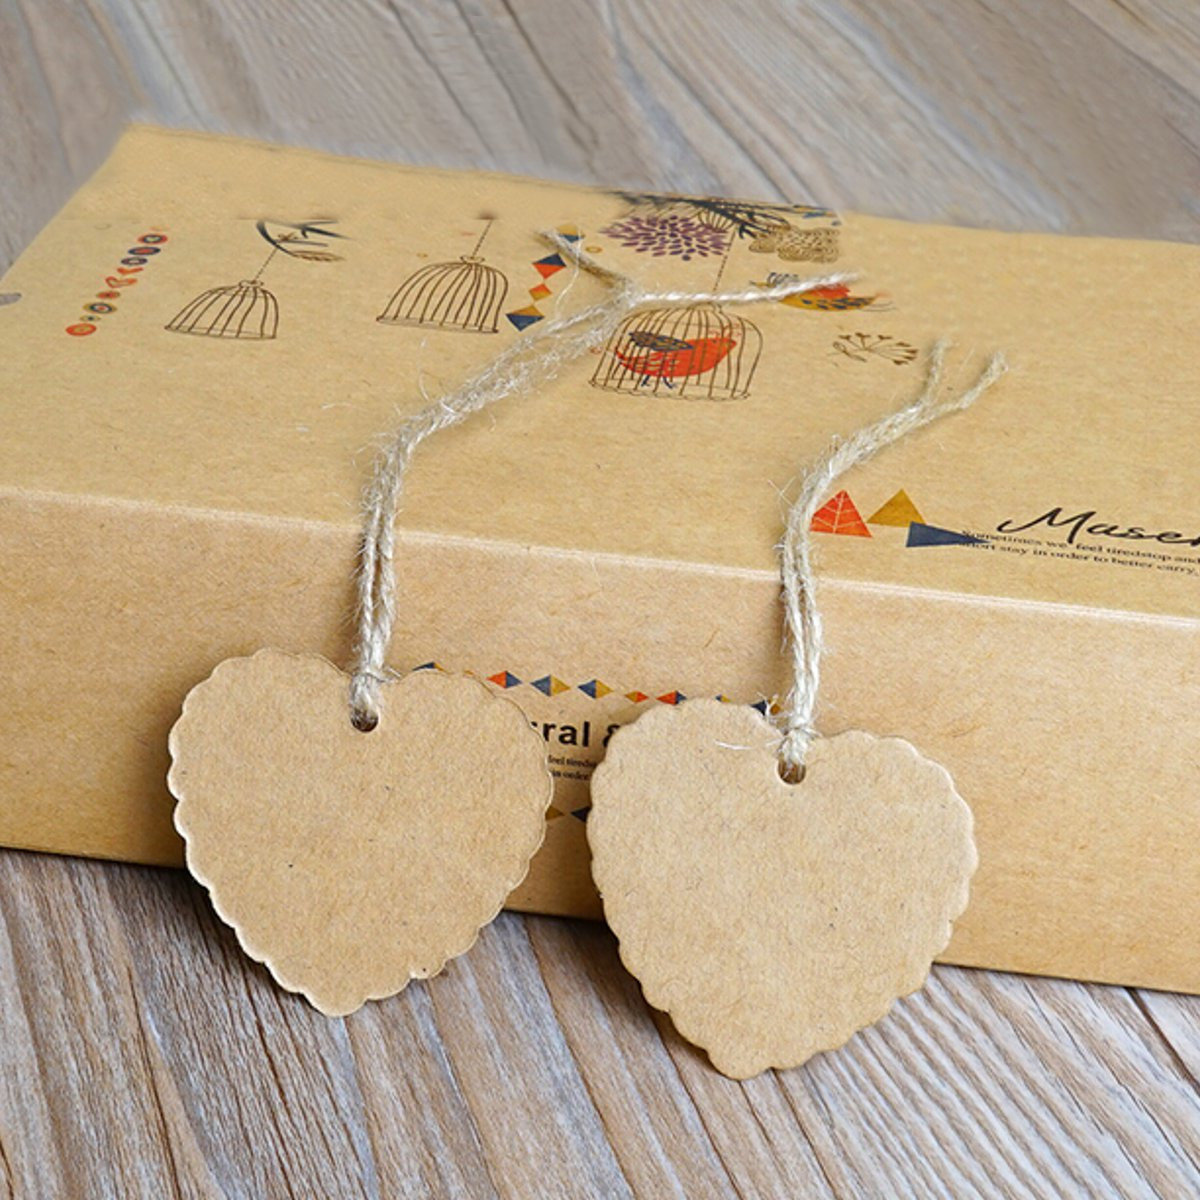 

100pcs Vintage Wedding Favor Gift Tags Blank Luggage Label Kraft Paper With Strings, White